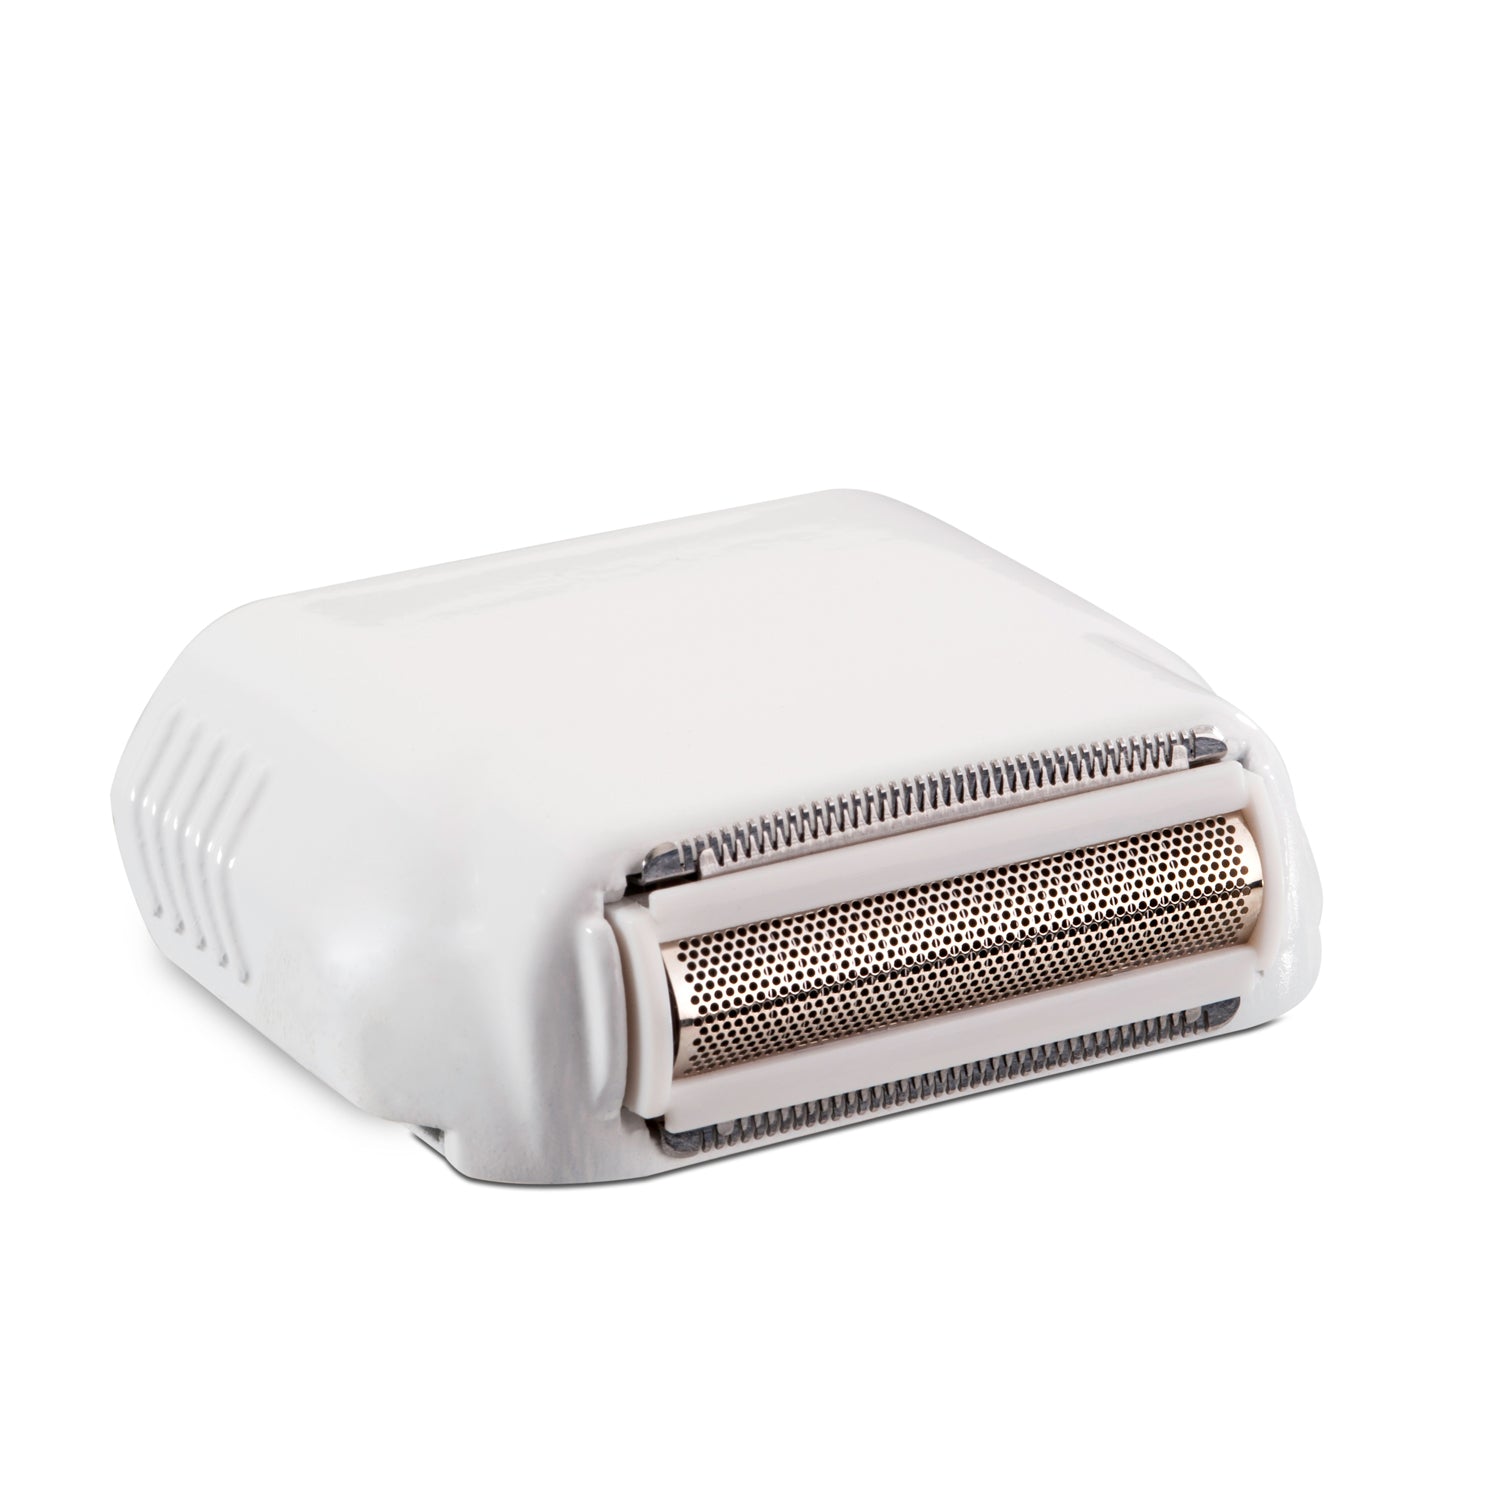 iluminage Touch/me Smooth Shaver Cartridge Head